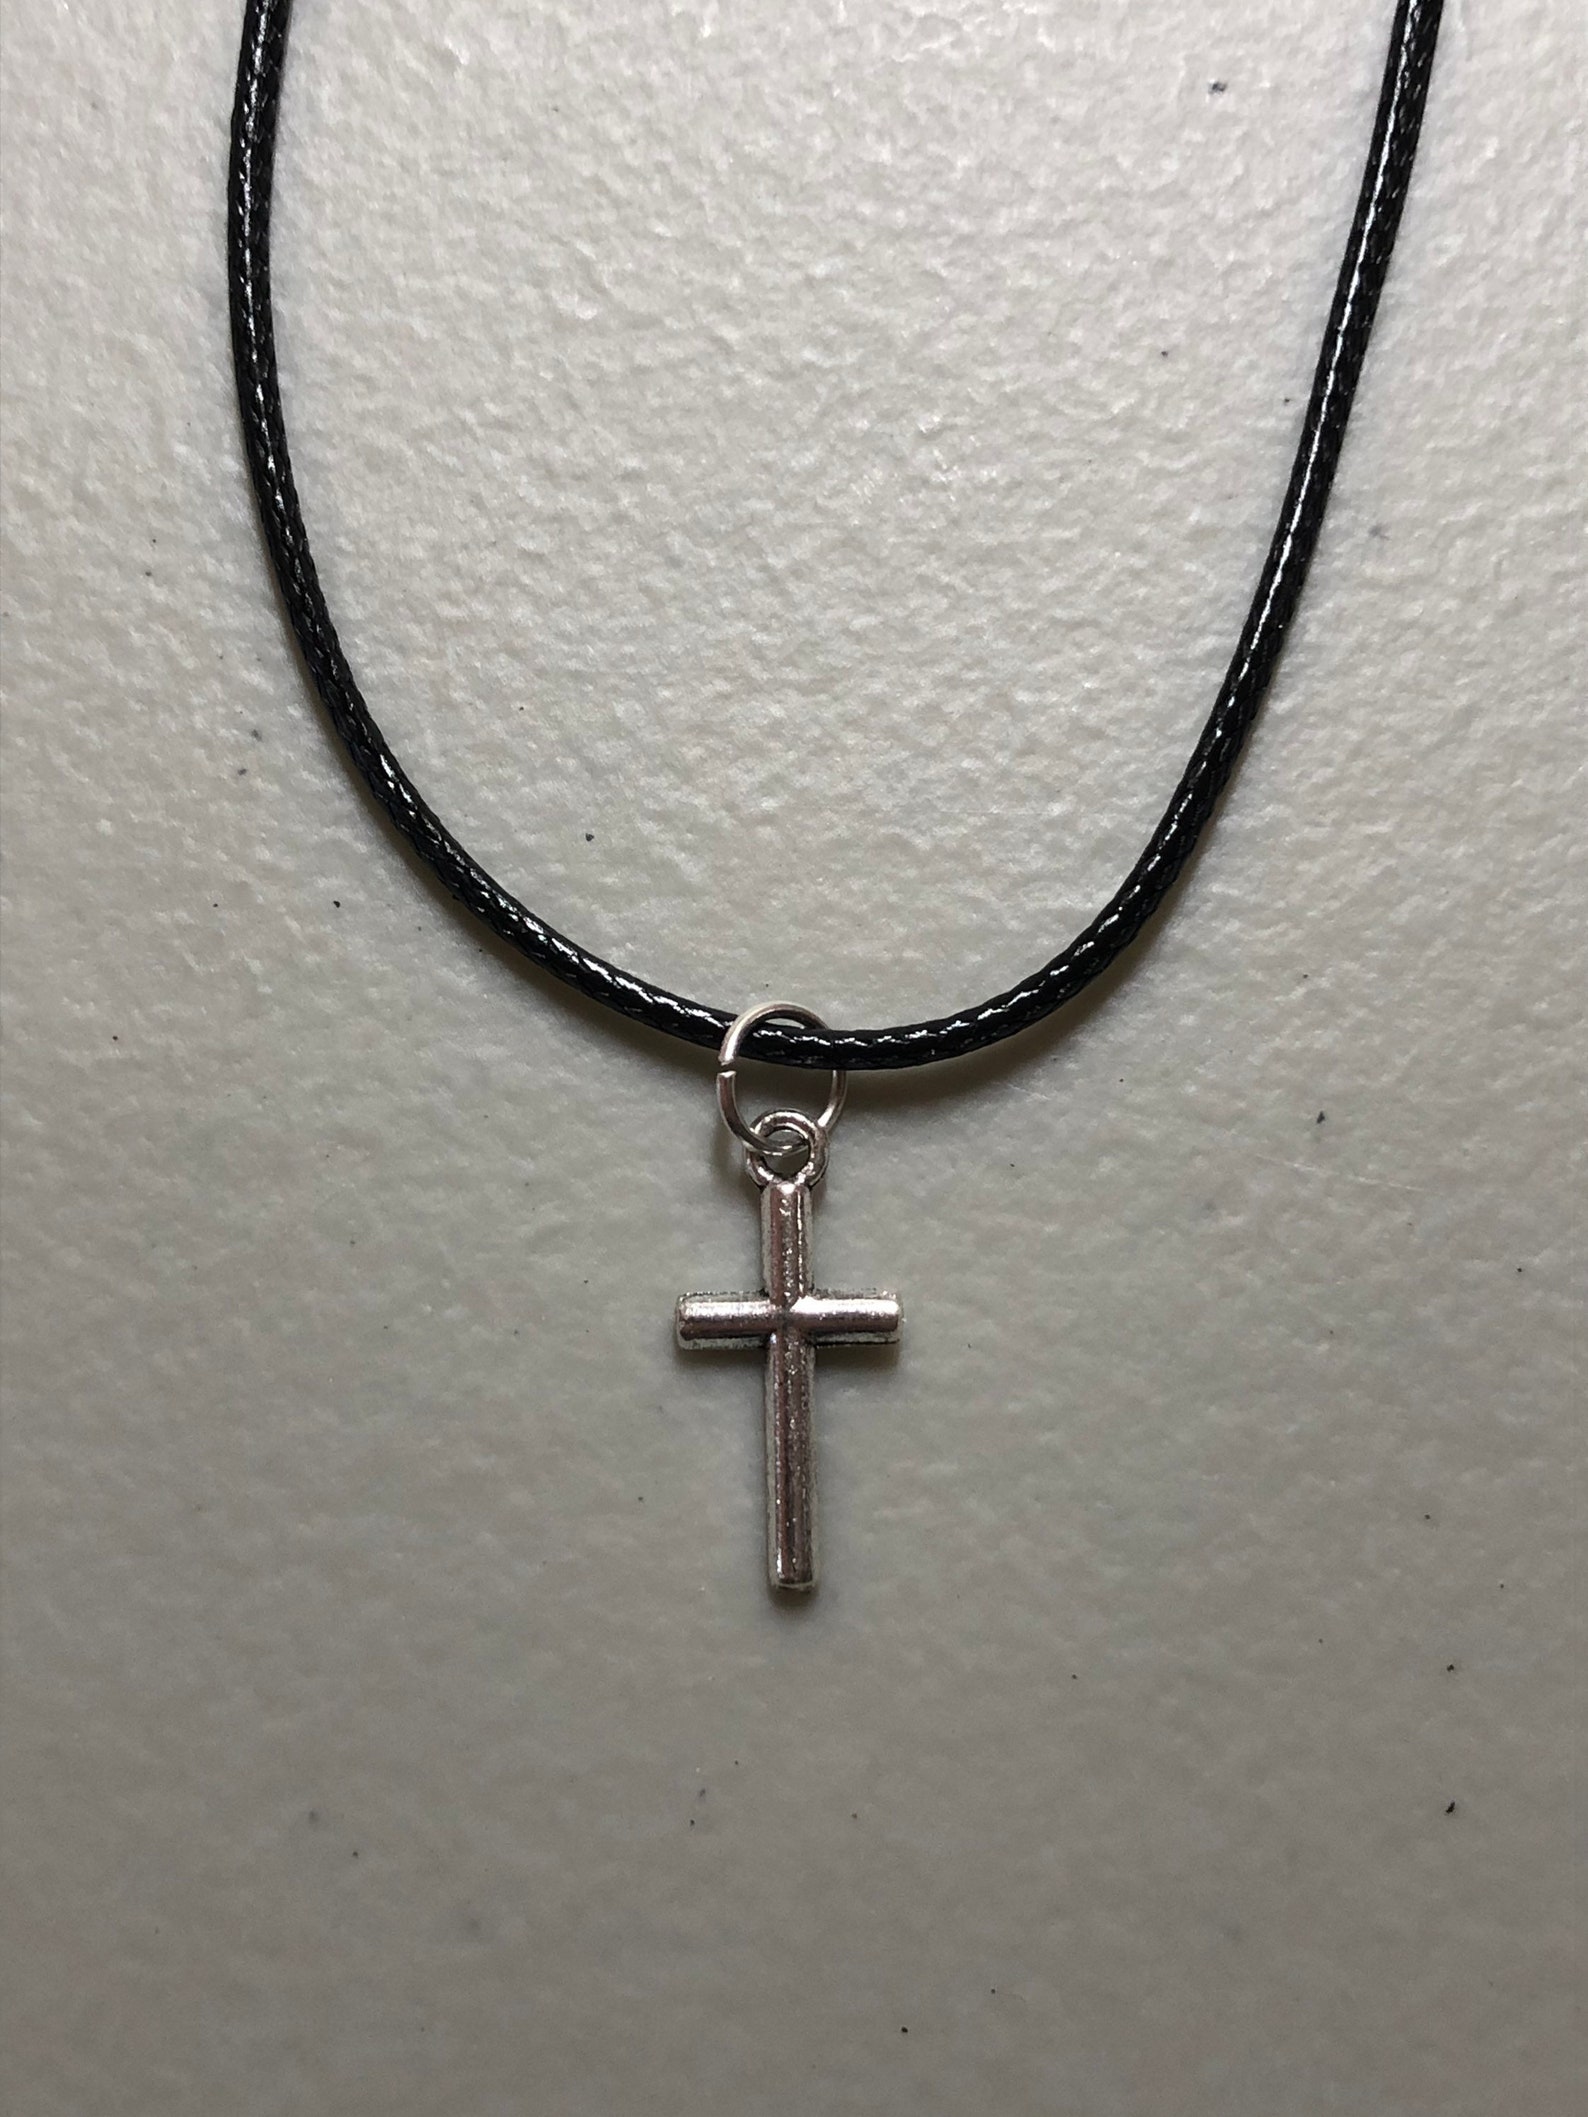 Cross Necklace with Black Waxed Cord | Etsy